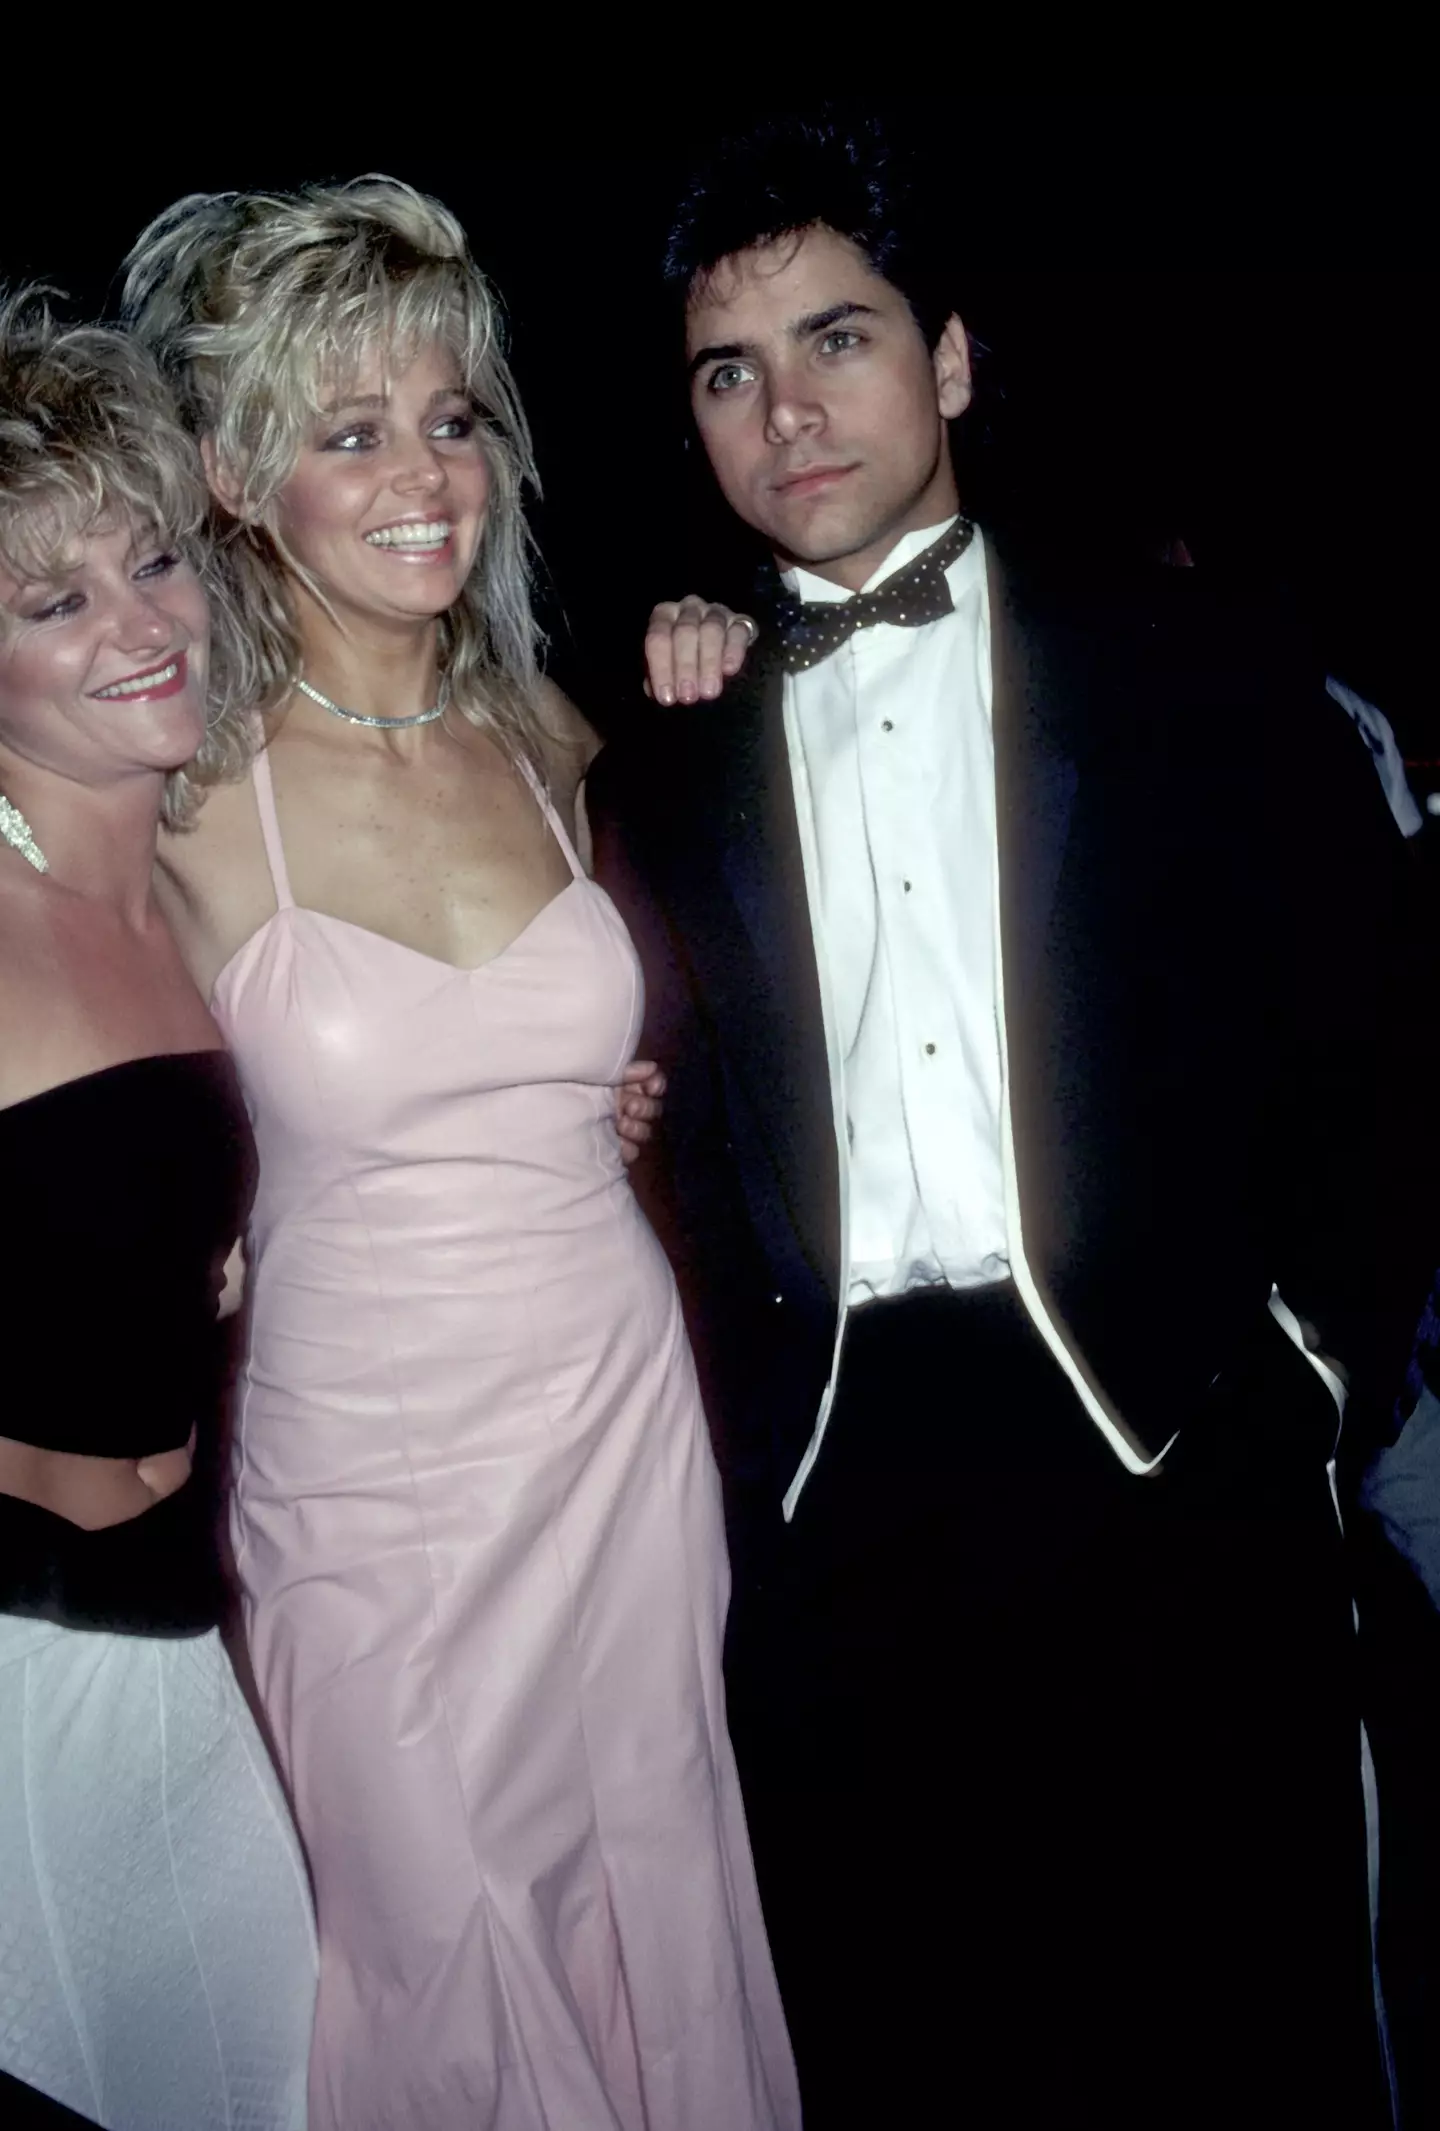 John Stamos and Teri Copley dated in the 1980s.